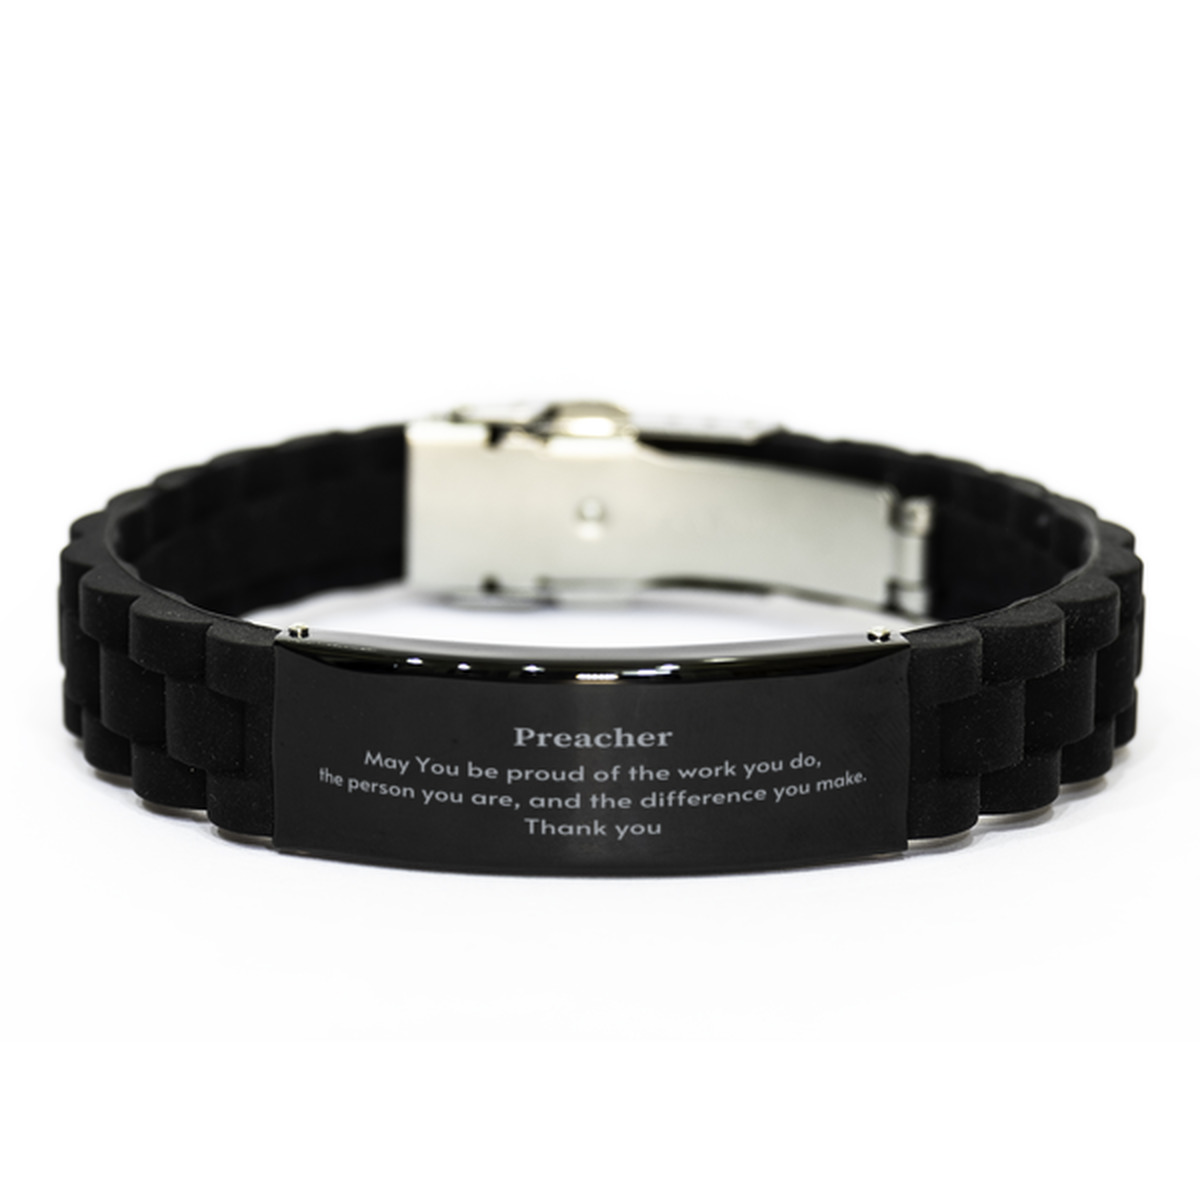 Heartwarming Black Glidelock Clasp Bracelet Retirement Coworkers Gifts for Preacher, Preacher May You be proud of the work you do, the person you are Gifts for Boss Men Women Friends